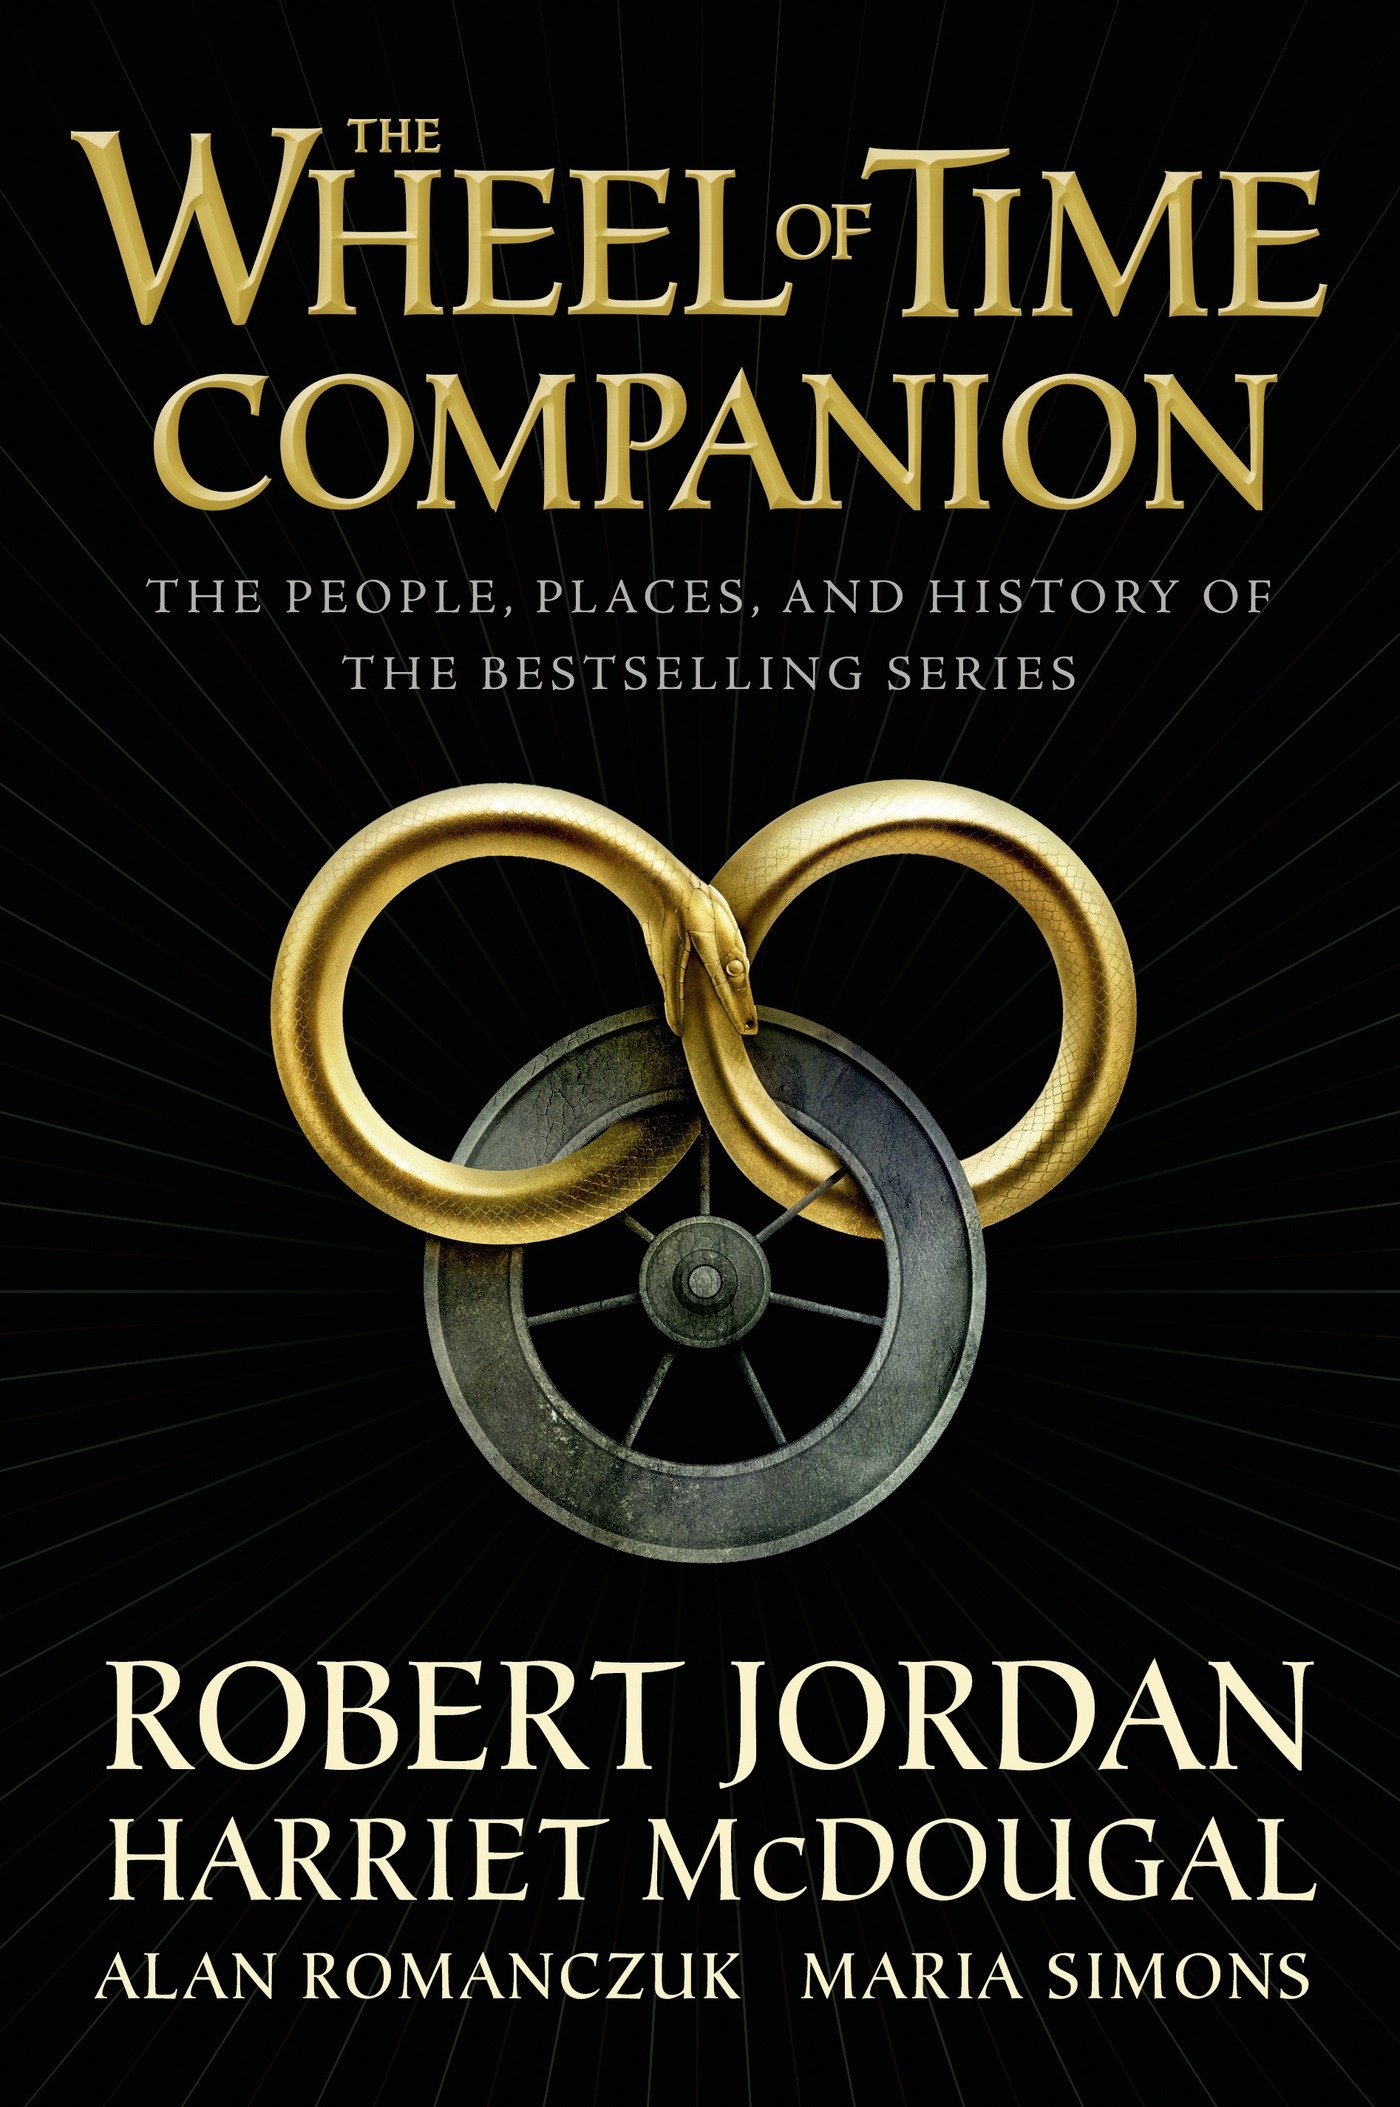 The Wheel of Time Companion: The People, Places, and History of the Bestselling Series (eBook) by Robert Jordan, Harriet McDougal, Alan Romanczuk, Maria Simons $2.99